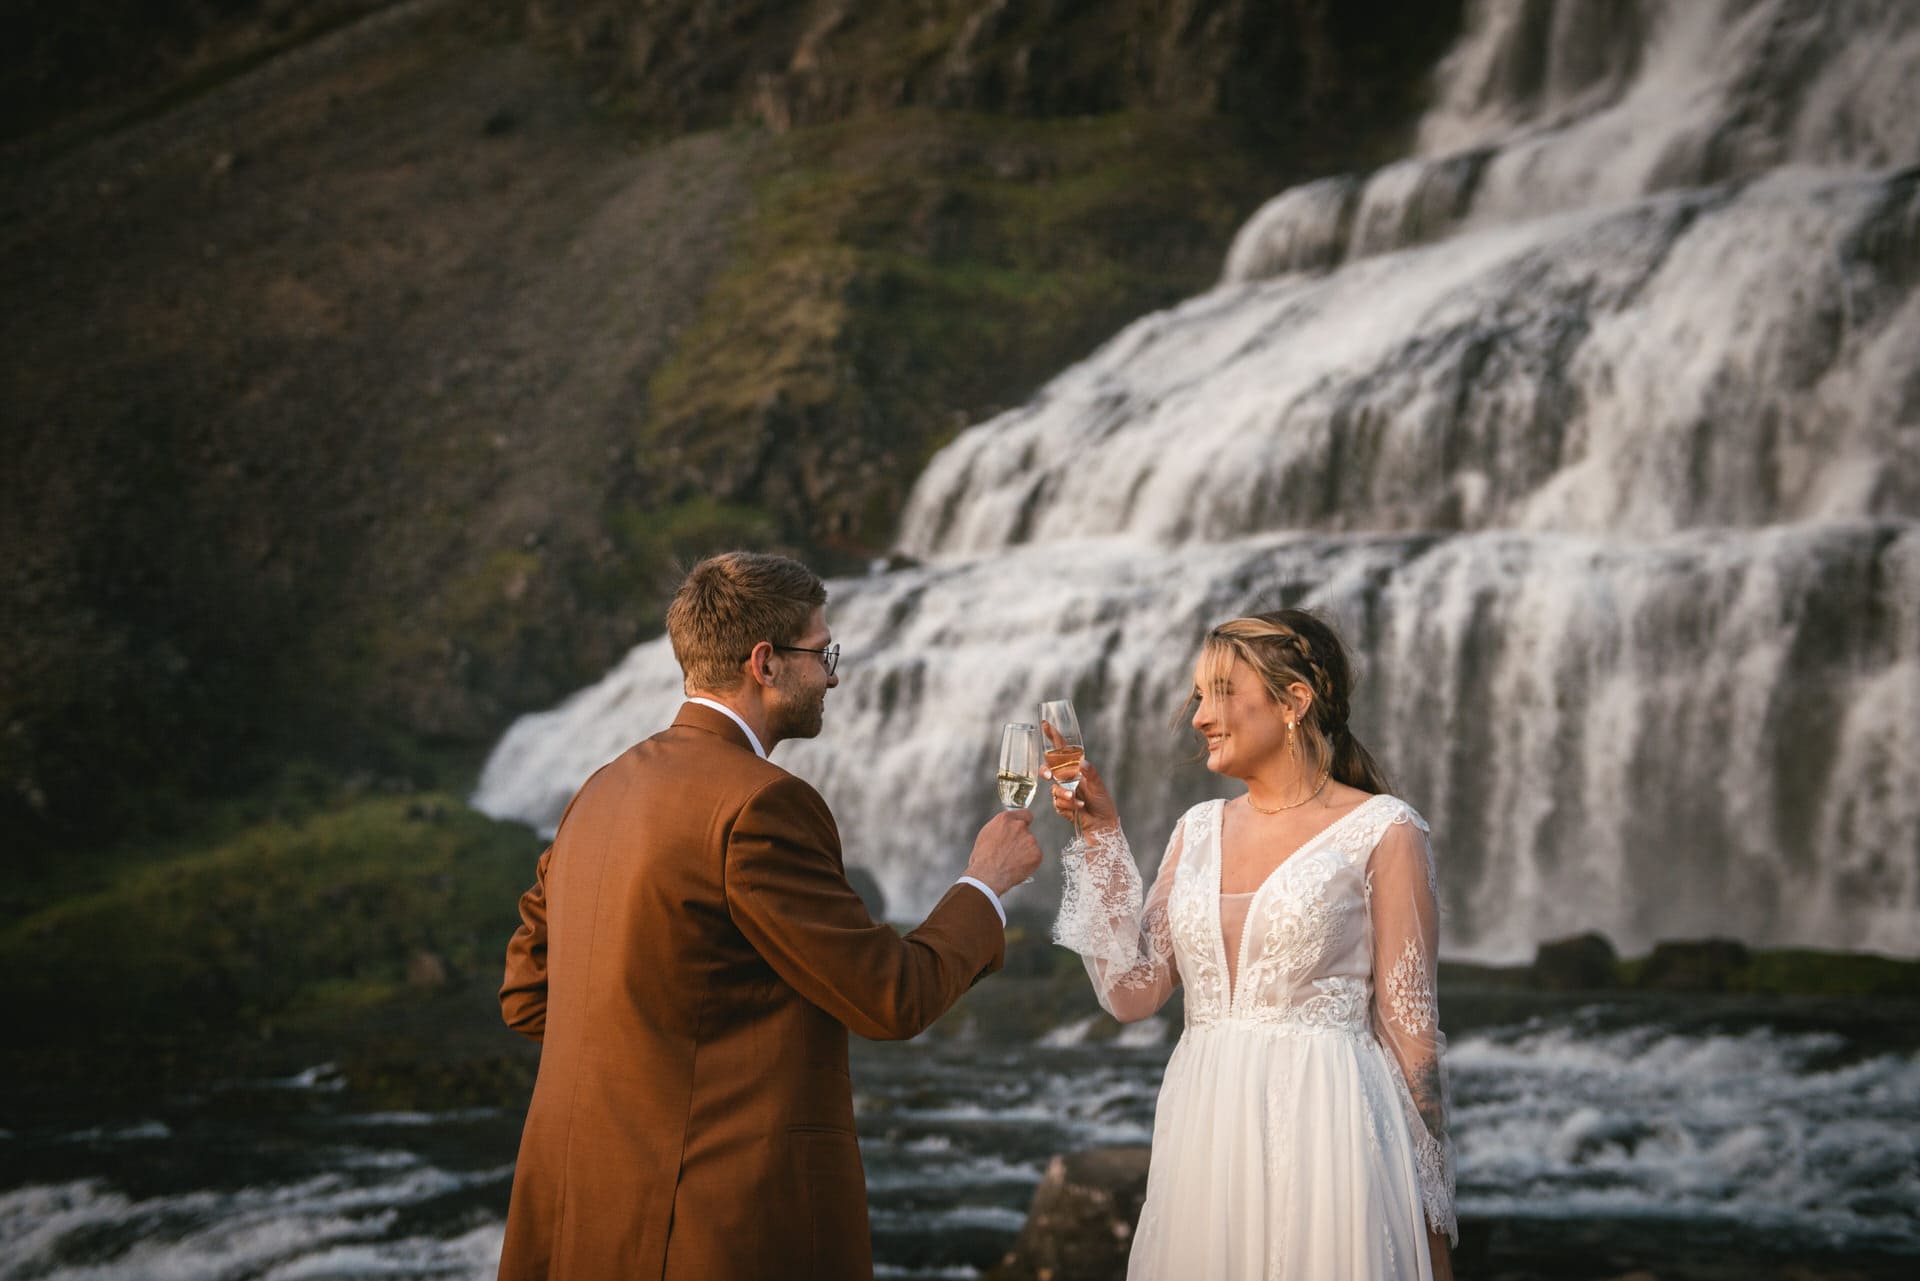 Bride and groom clinking champagne glasses under the midnight sun during their Iceland elopement.